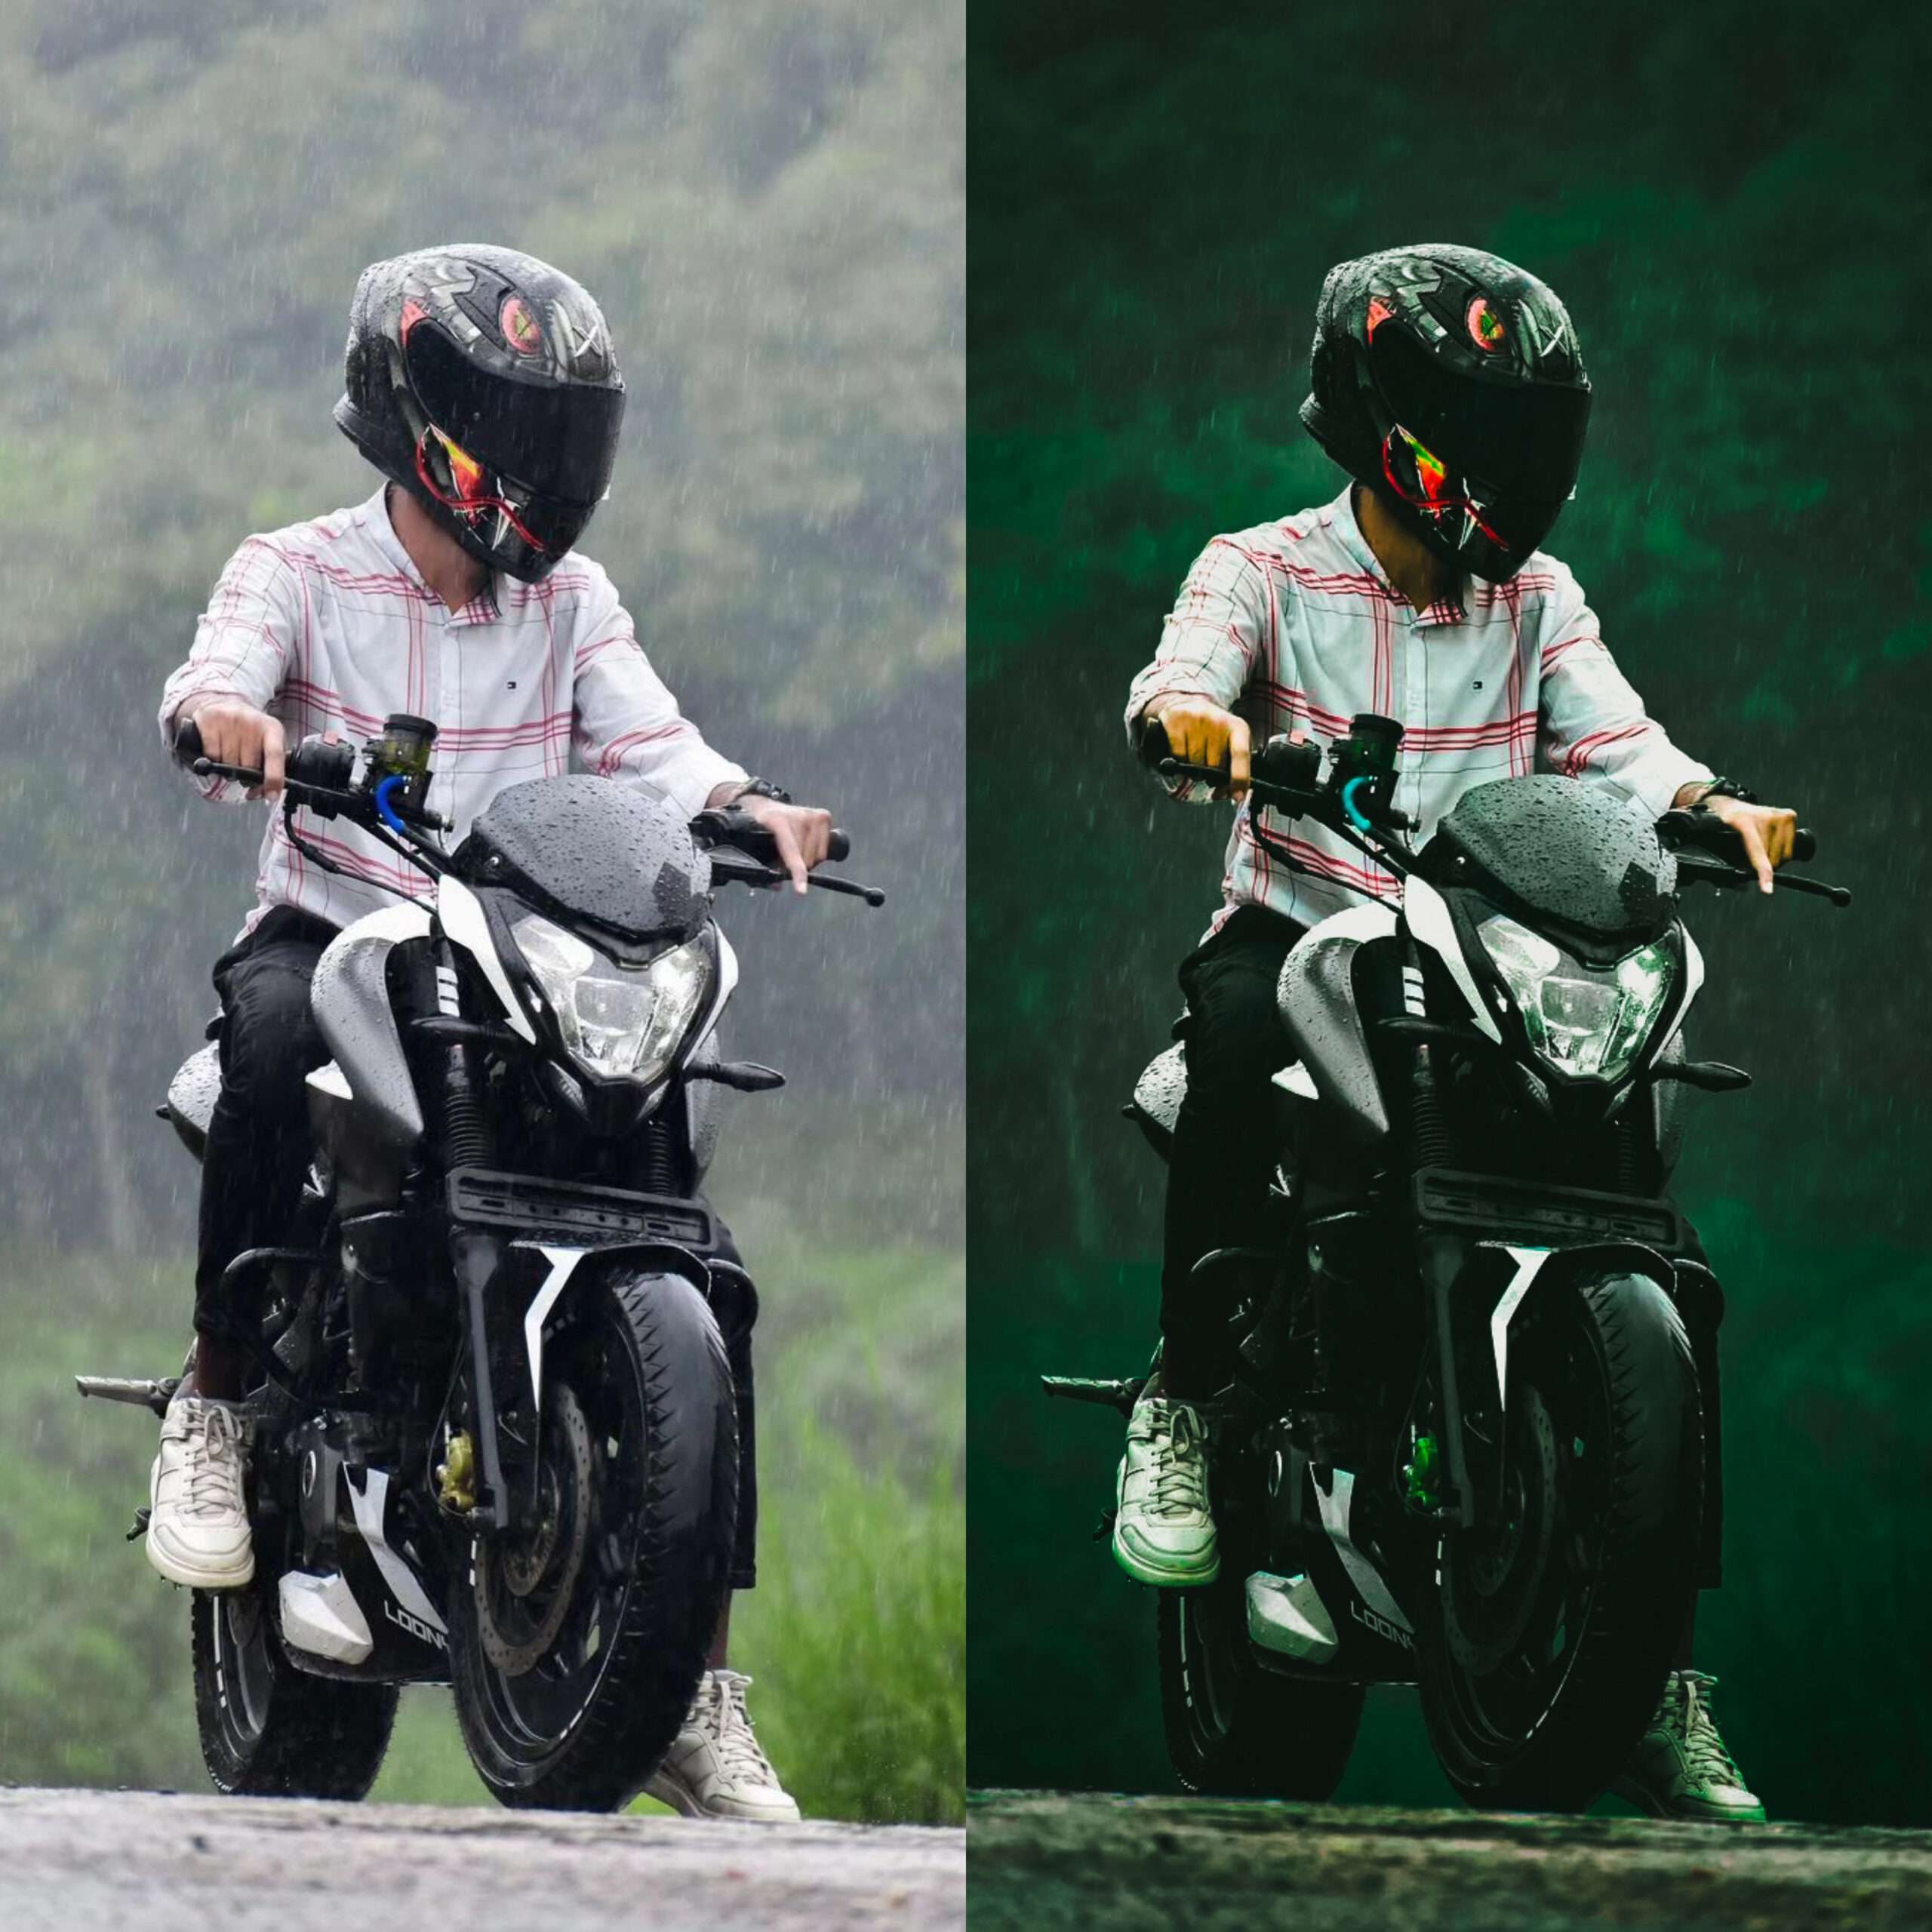 Biker before and after colour grading with Lightroom Presets